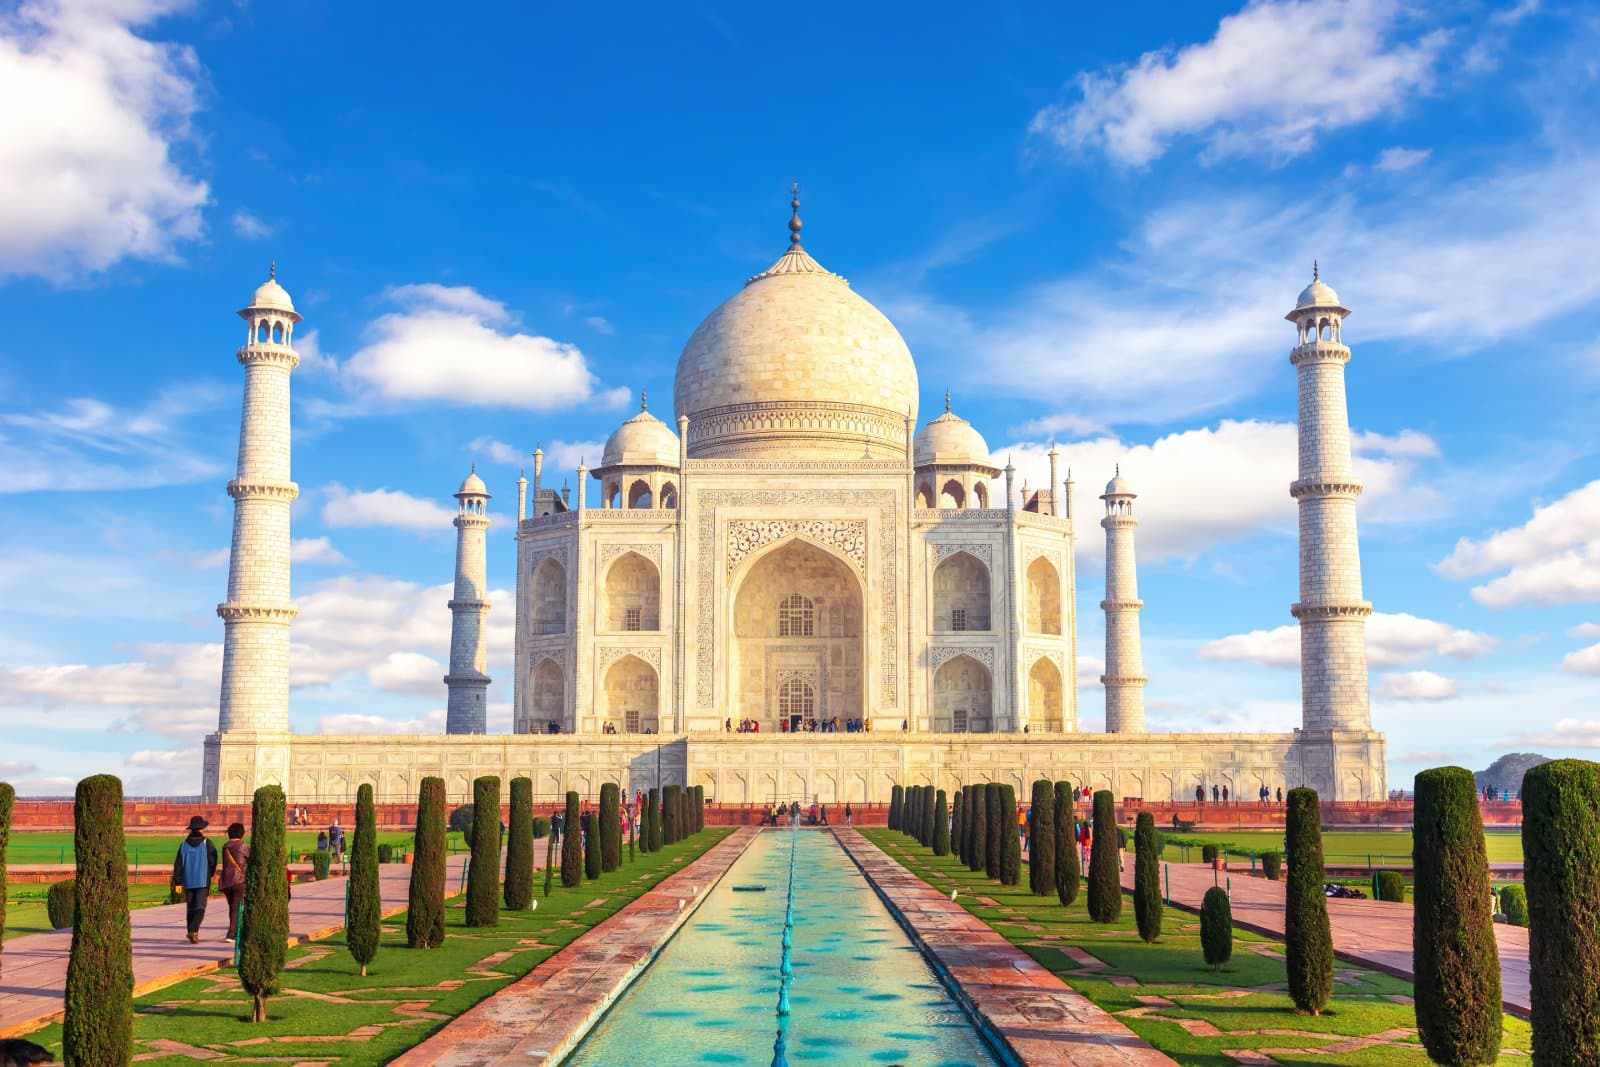 <p><span>The Taj Mahal in Agra, India, stands as a monument to love and loss. Emperor Shah Jahan built it in memory of his beloved wife. This ivory-white marble mausoleum combines elements of Persian, Islamic, and Indian architectural styles, creating a masterpiece that’s revered worldwide.</span></p> <p><span>The Taj Mahal is an emotional experience, evoking the romance and tragedy of its creation. The complex also includes beautiful gardens, a mosque, and other outbuildings, all contributing to the serene and solemn atmosphere of the site.</span></p> <p><b>Insider’s Tip : </b><span>Take a boat ride on the Yamuna River behind the Taj Mahal during sunset for a unique view.</span></p> <p><b>When To Travel: </b><span>October to March for cooler weather and clear skies.</span></p> <p><b>How To Get There: </b><span>Agra is well-connected by road and rail from New Delhi and other major cities in India.</span></p>